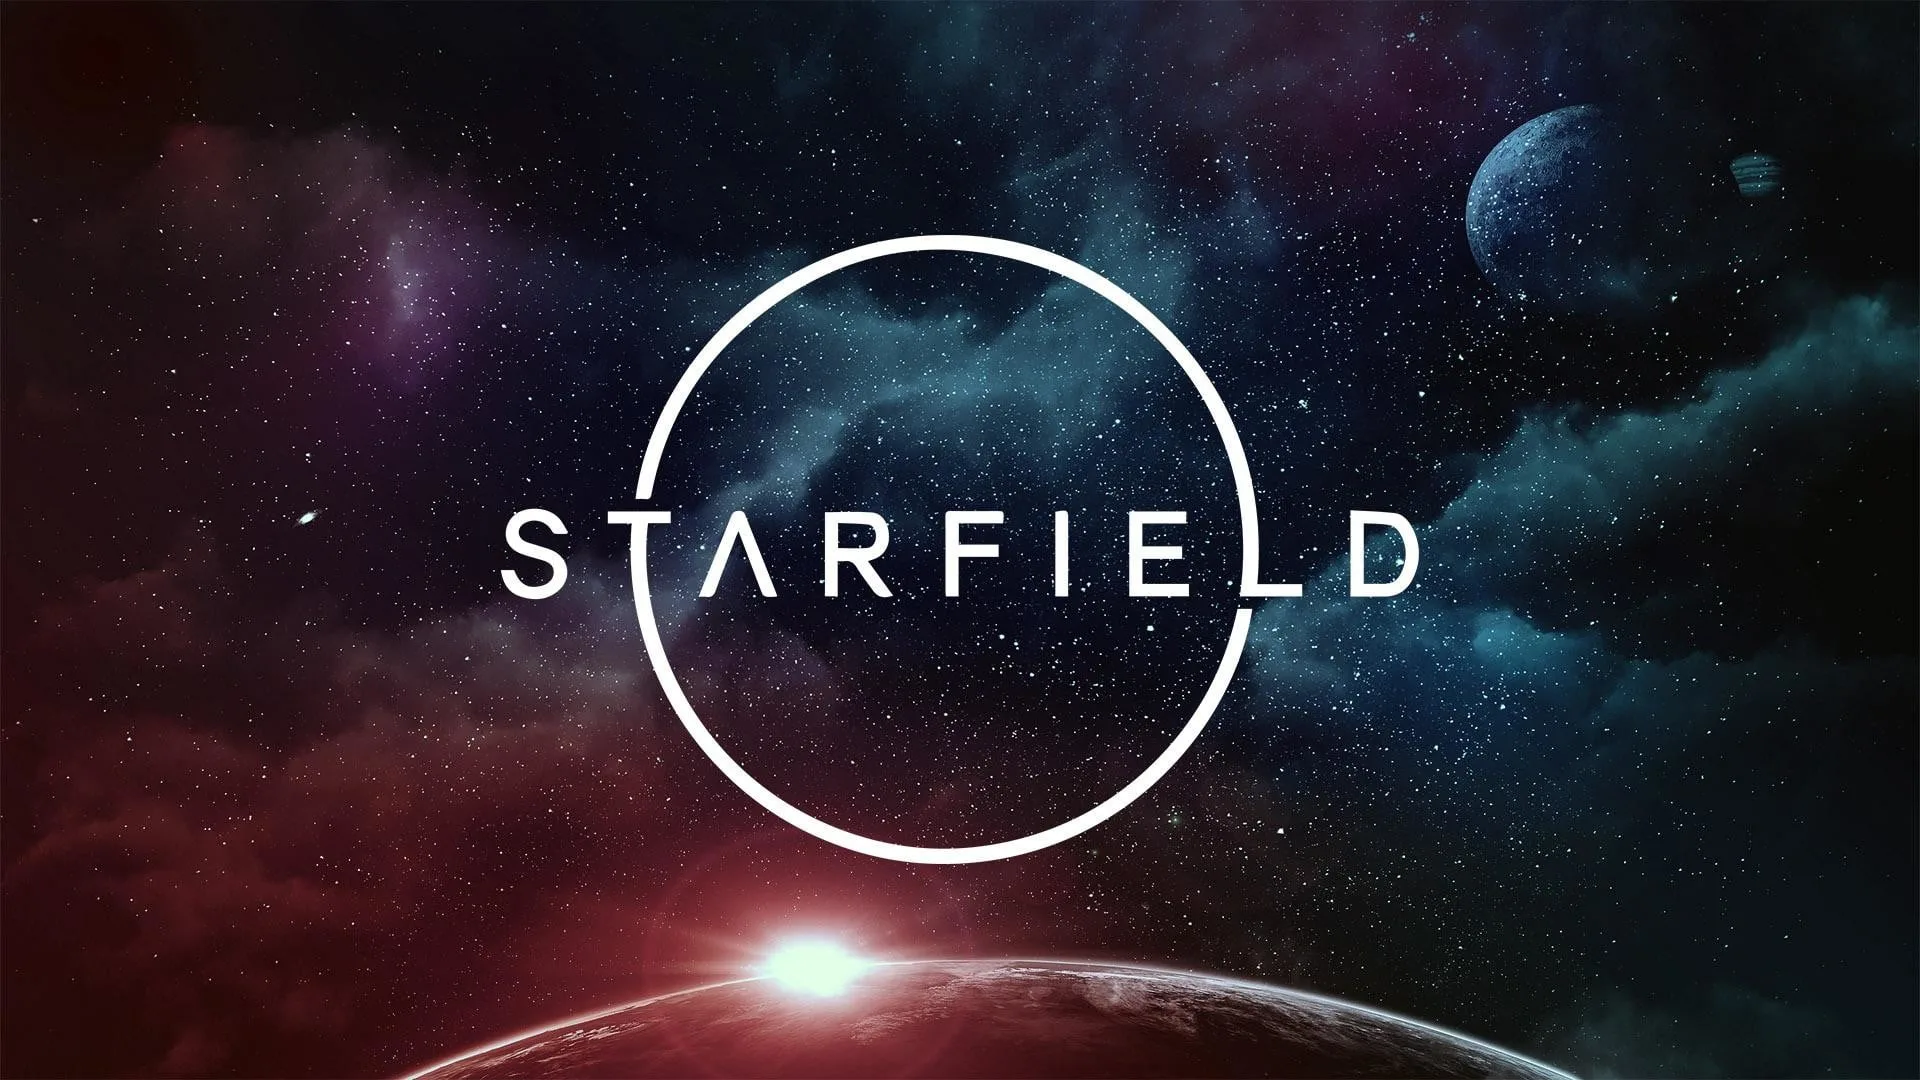 Starfield Fans Invade Game with Todd Howard Paintings